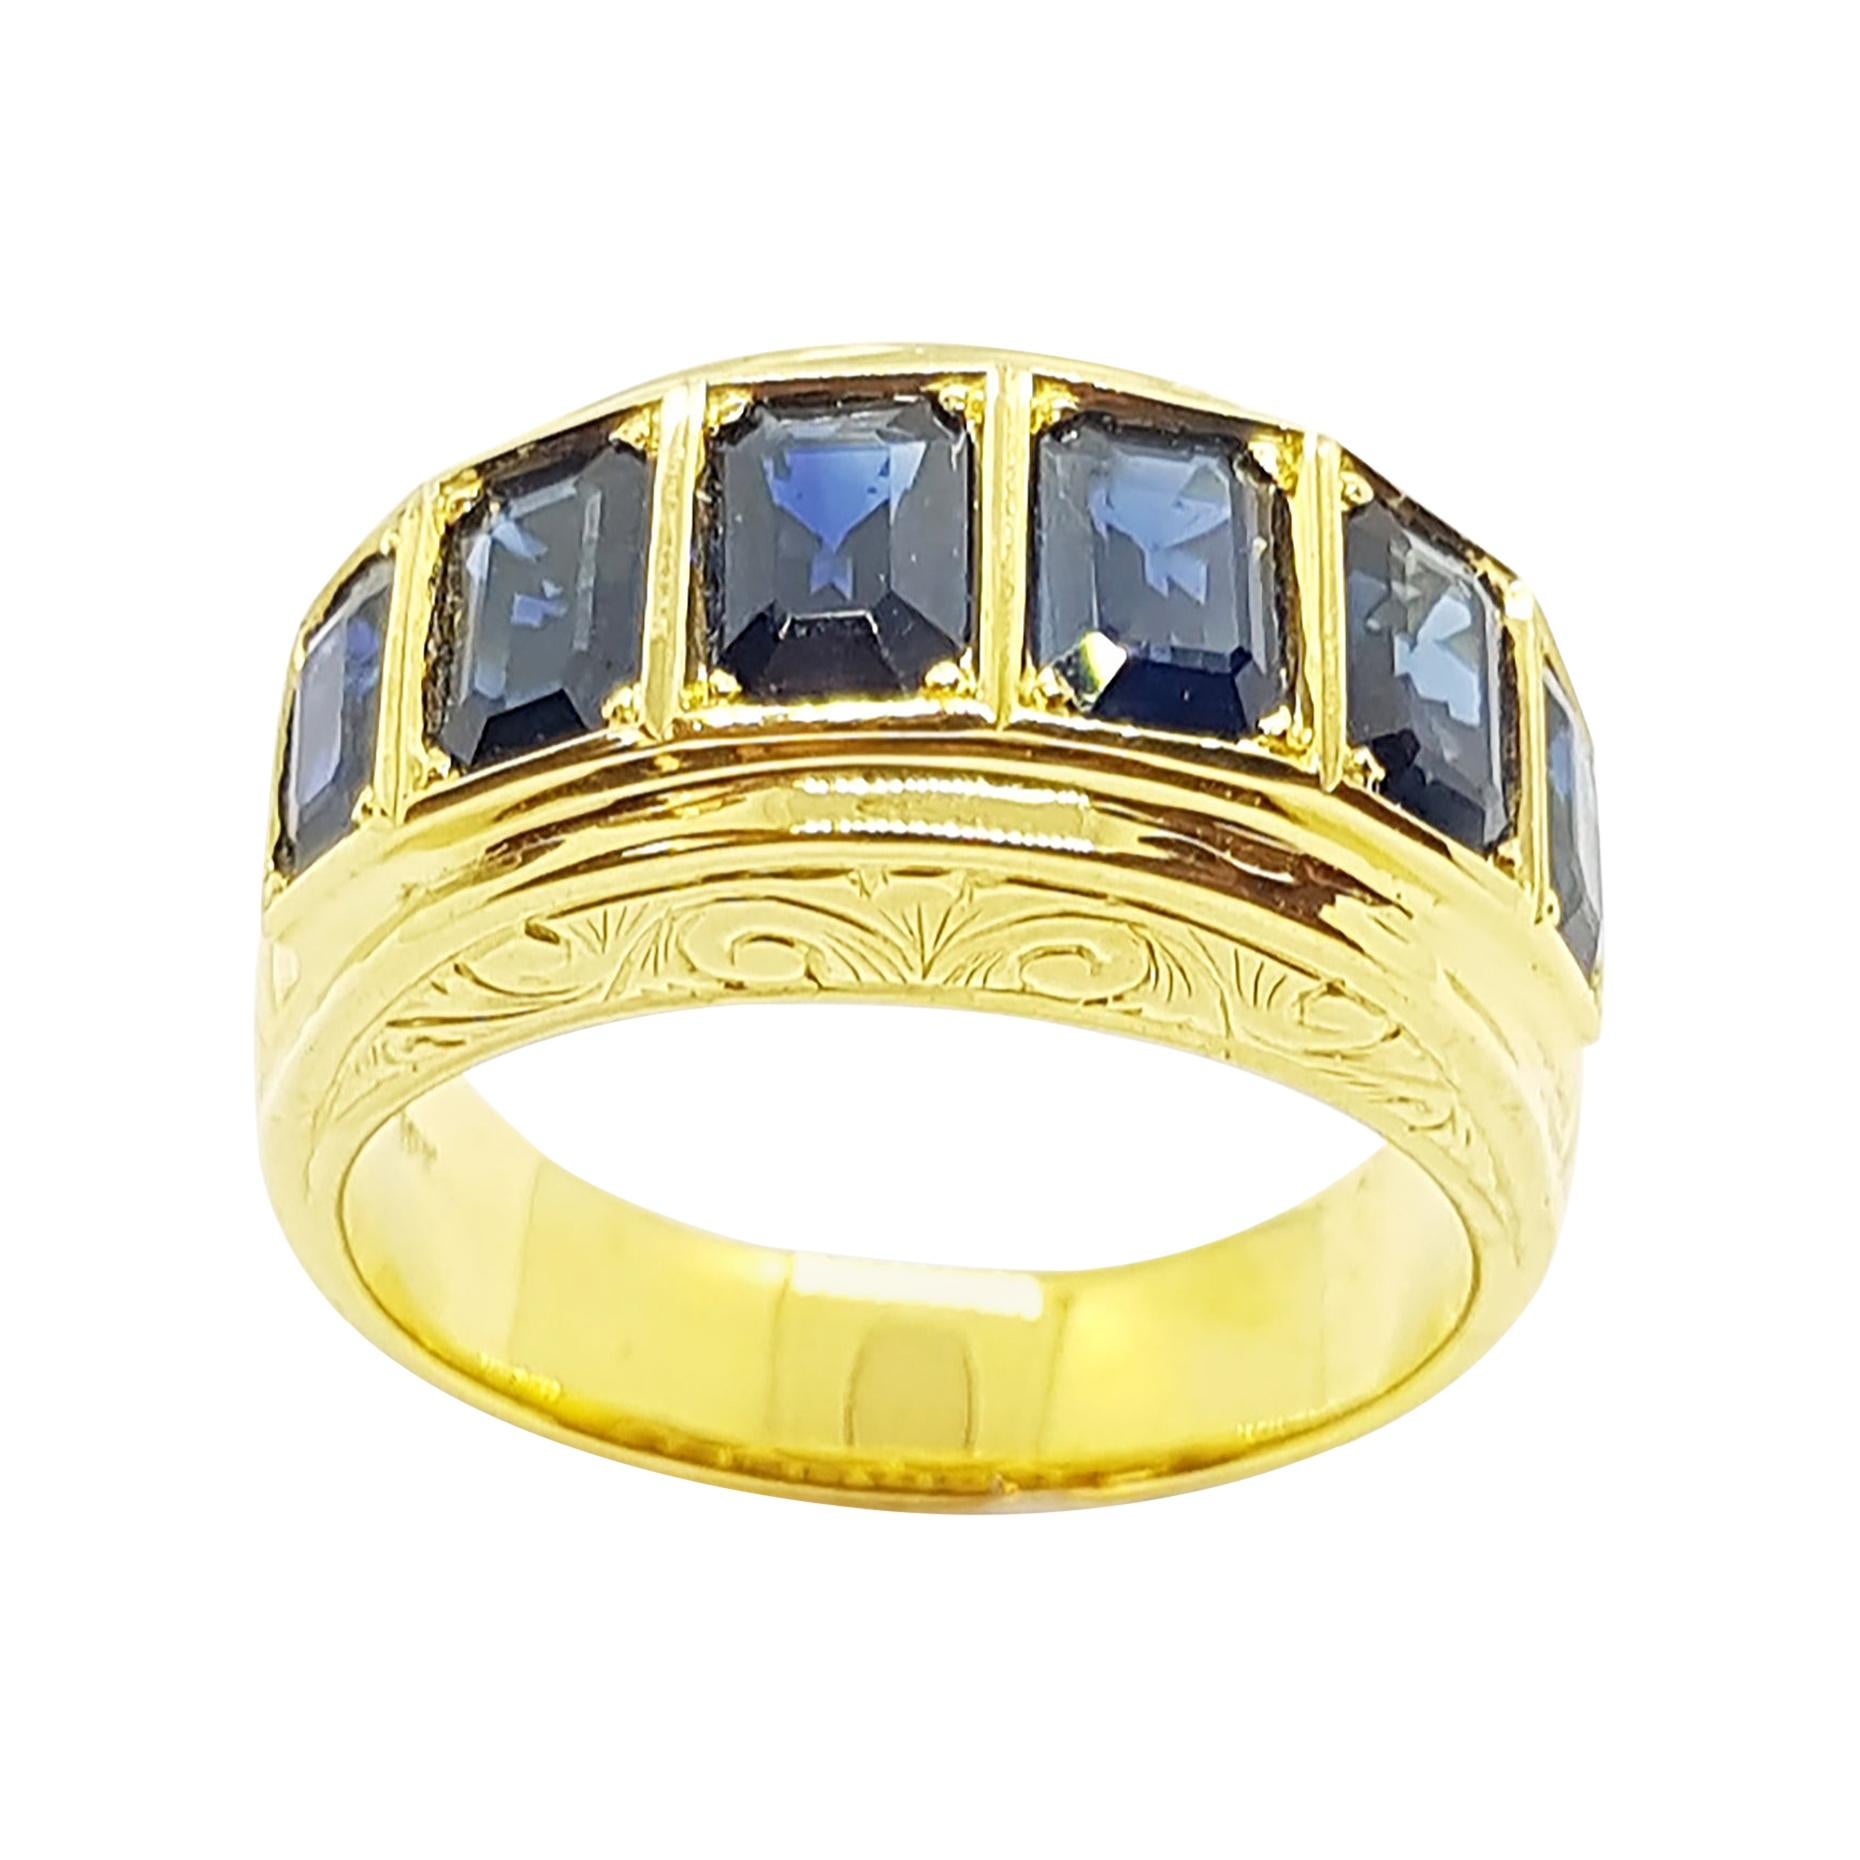 Blue Sapphire Ring with Engraving Set in 18 Karat Gold Settings For Sale